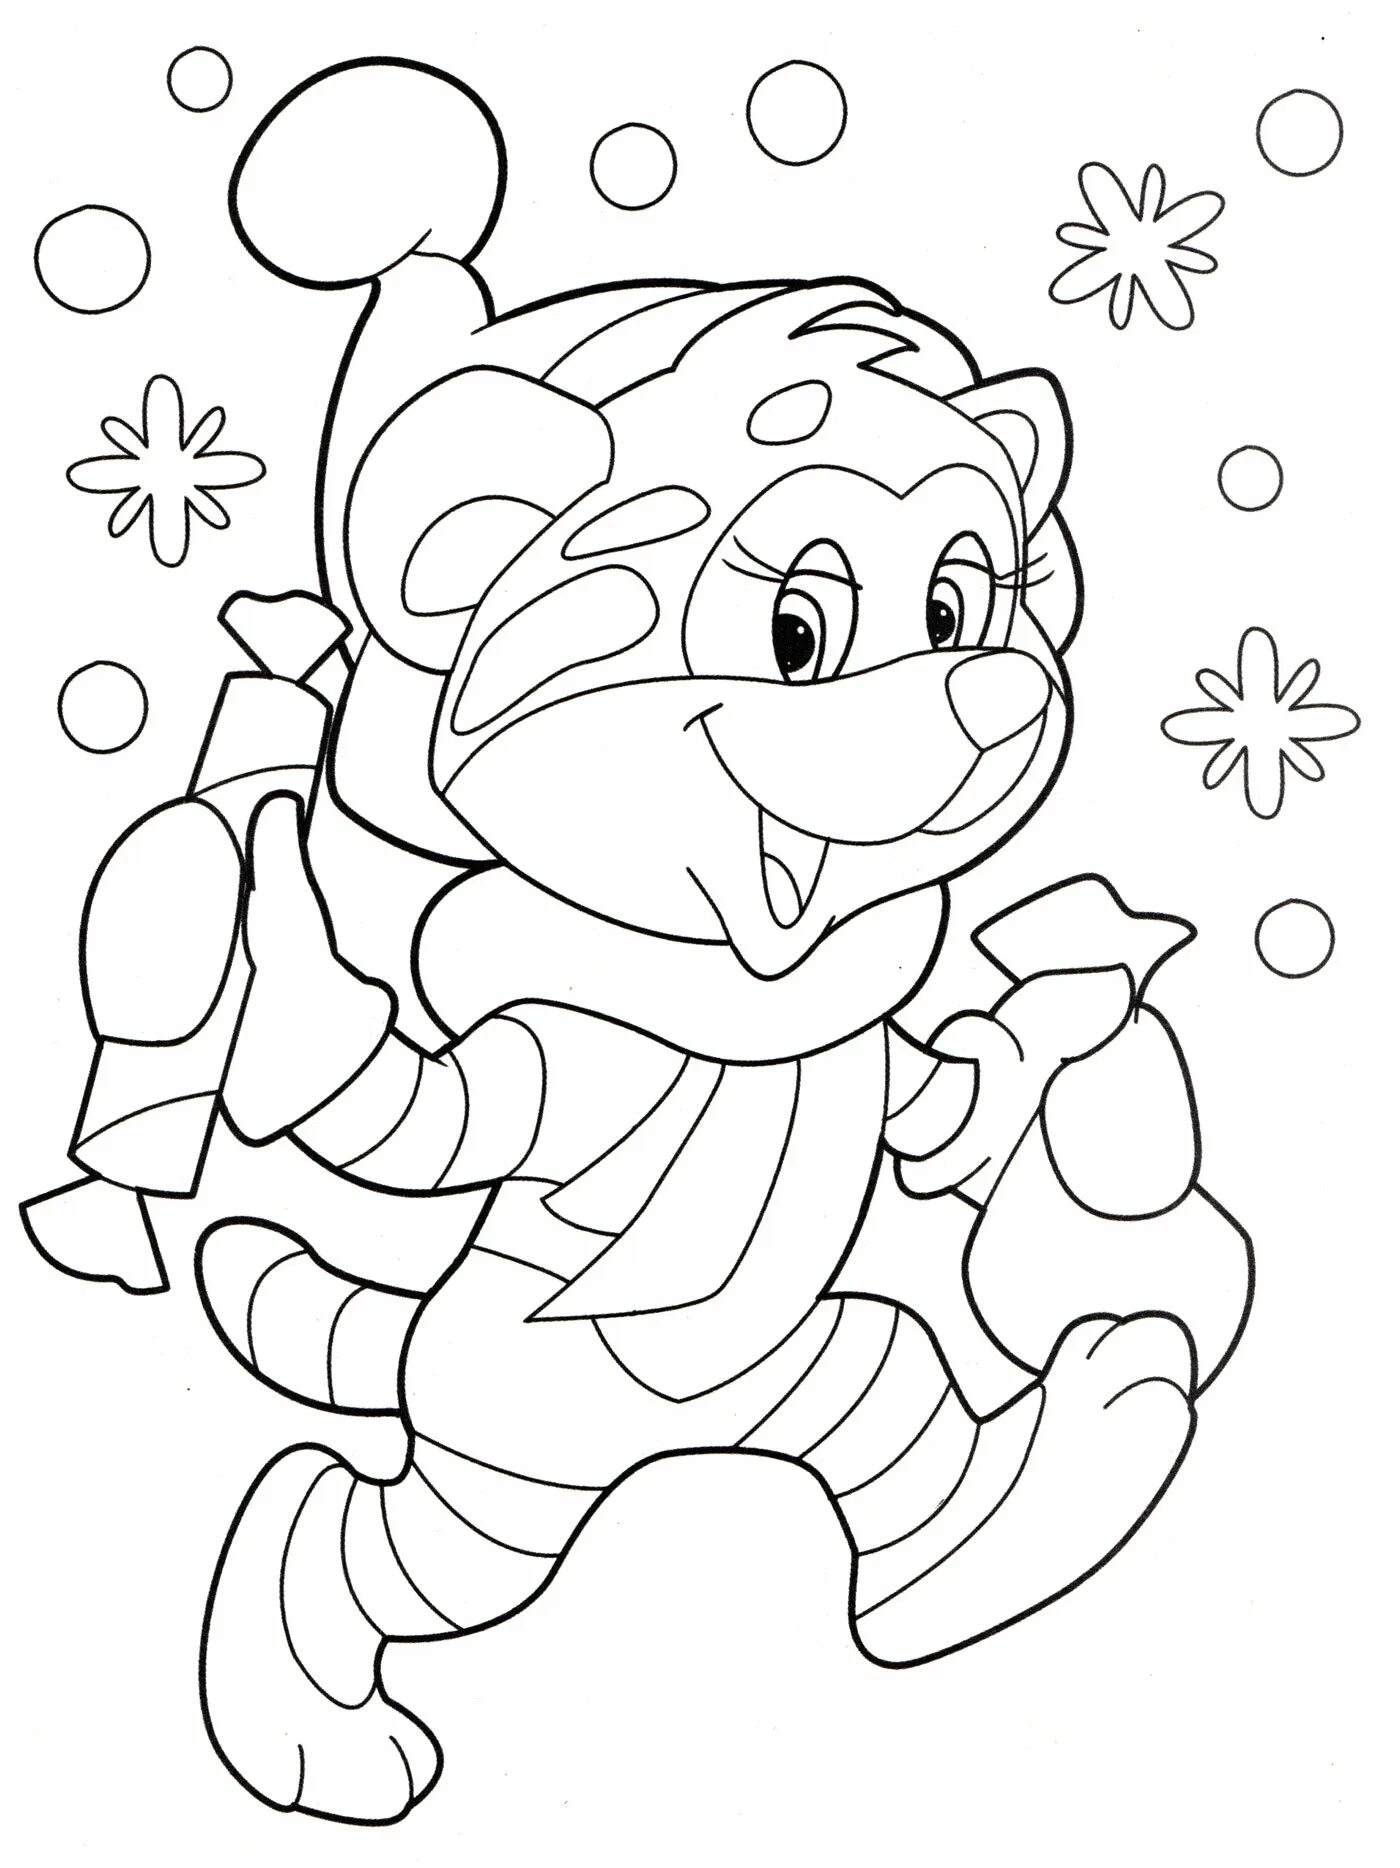 Gorgeous tiger cub coloring page